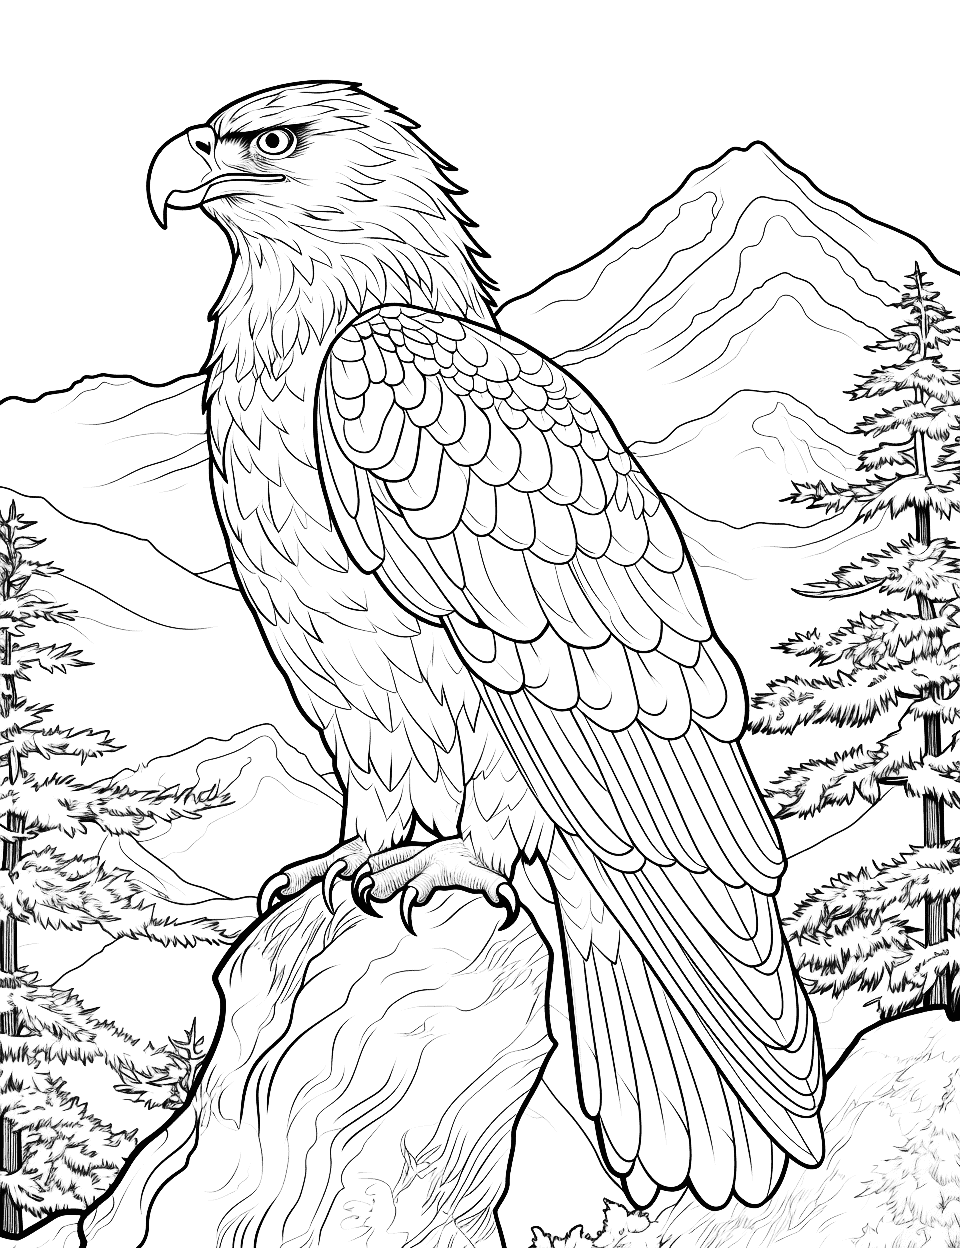 Eagle's Nest View Adult Coloring Page - An eagle overlooking its domain from a high nest.